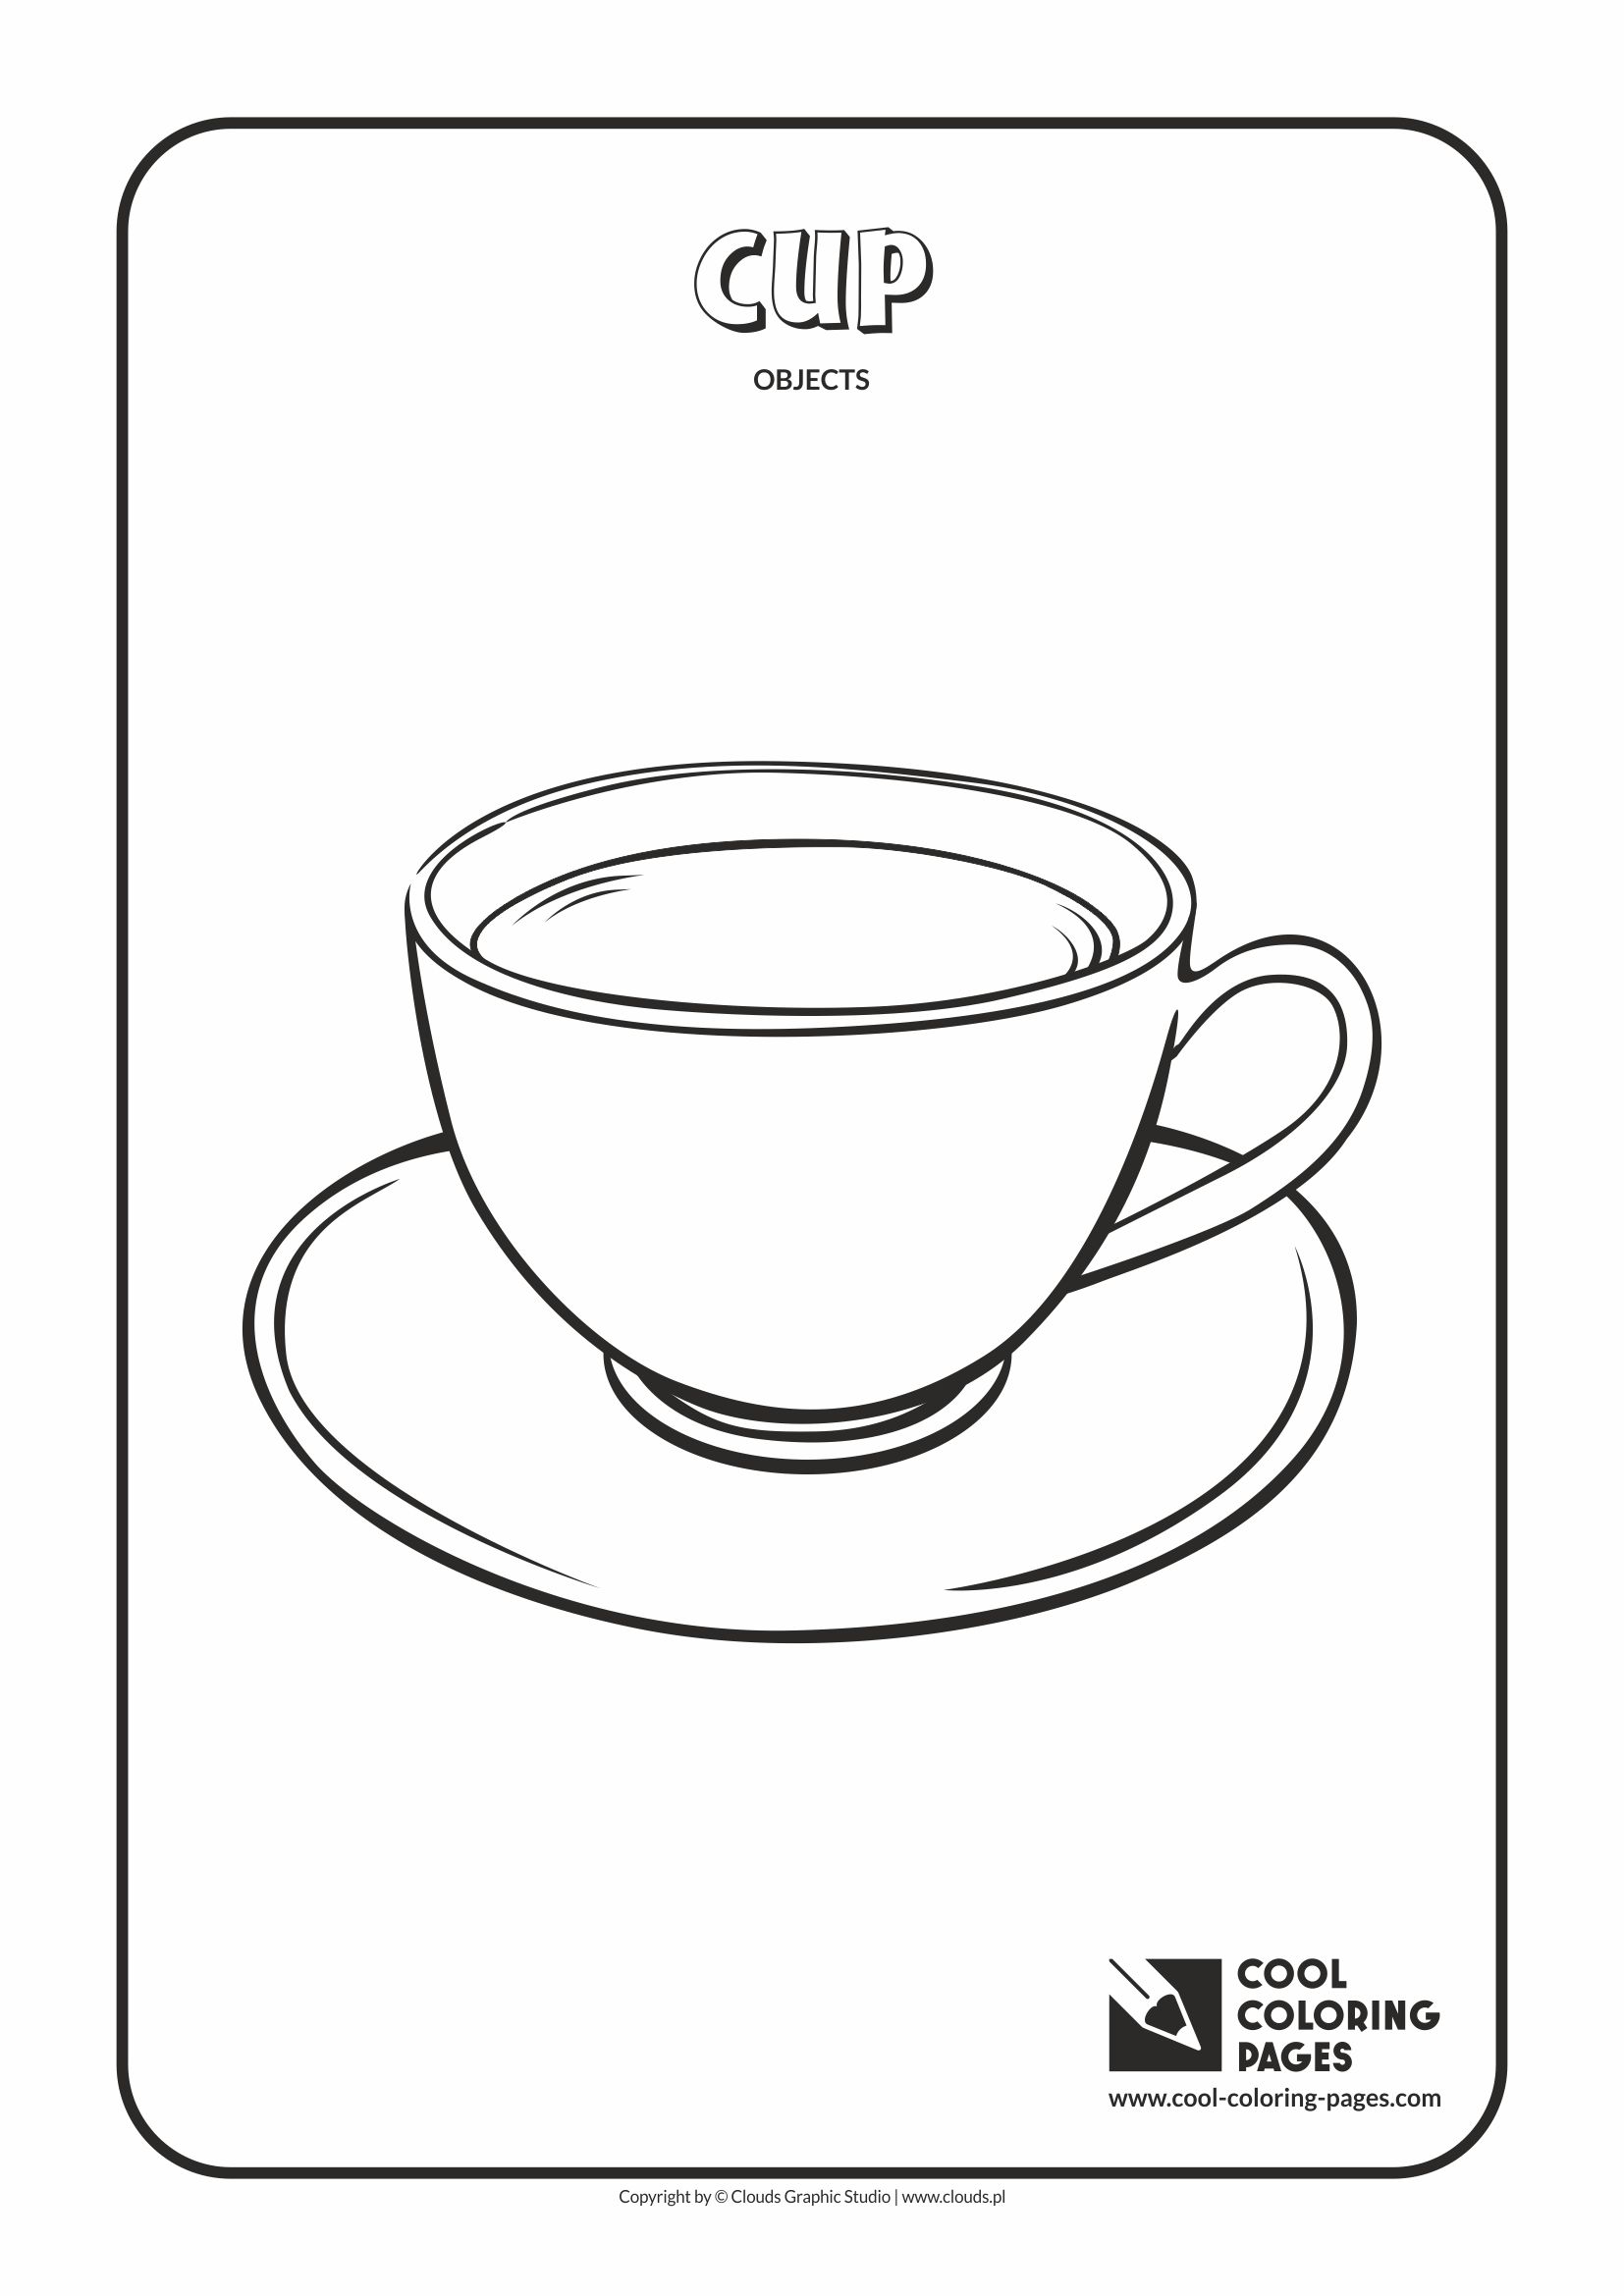 Cool Coloring Pages - Coloring objects / Cup